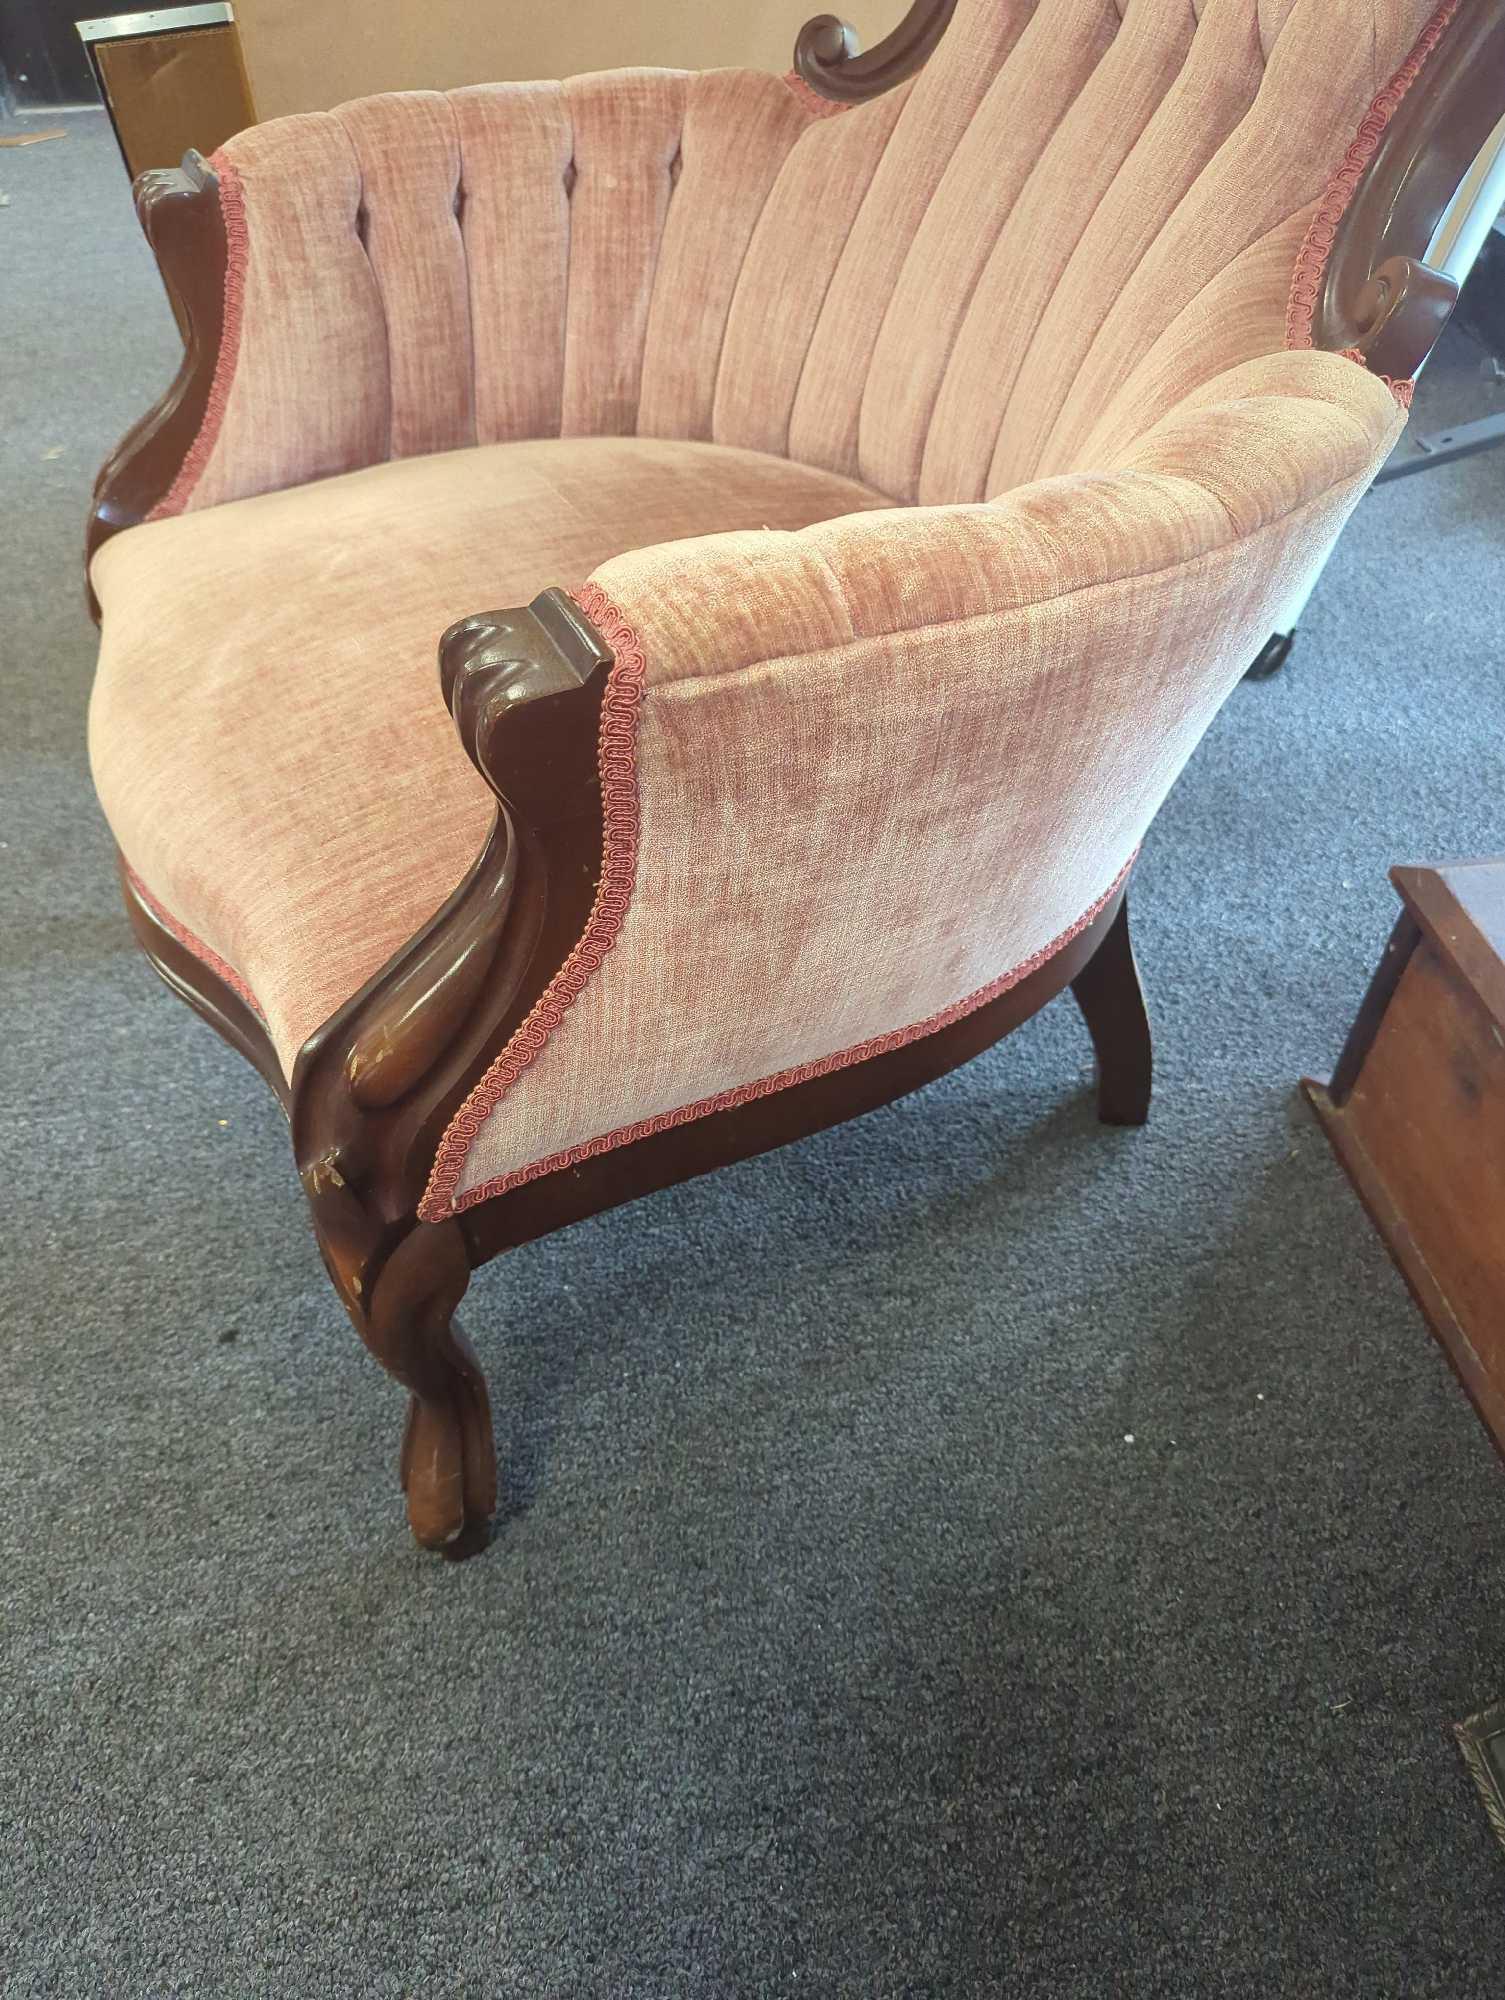 His Vintage Victorian style carved parlor chair, With A Button Tufted Back, Measure Approximately 25